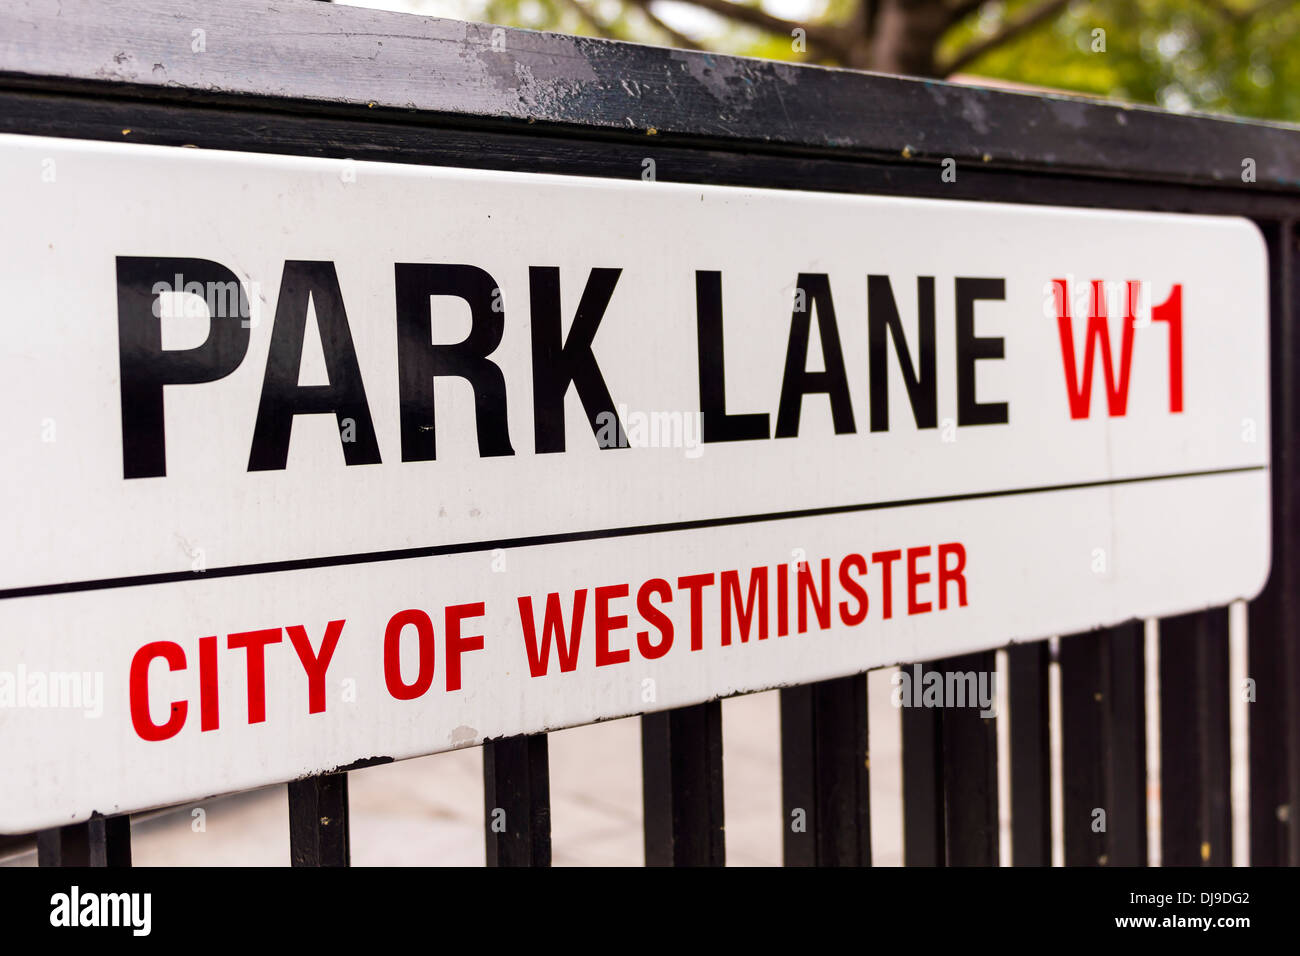 Park Lane, W1 City of Westminster sign on black railings in the city of London. Stock Photo